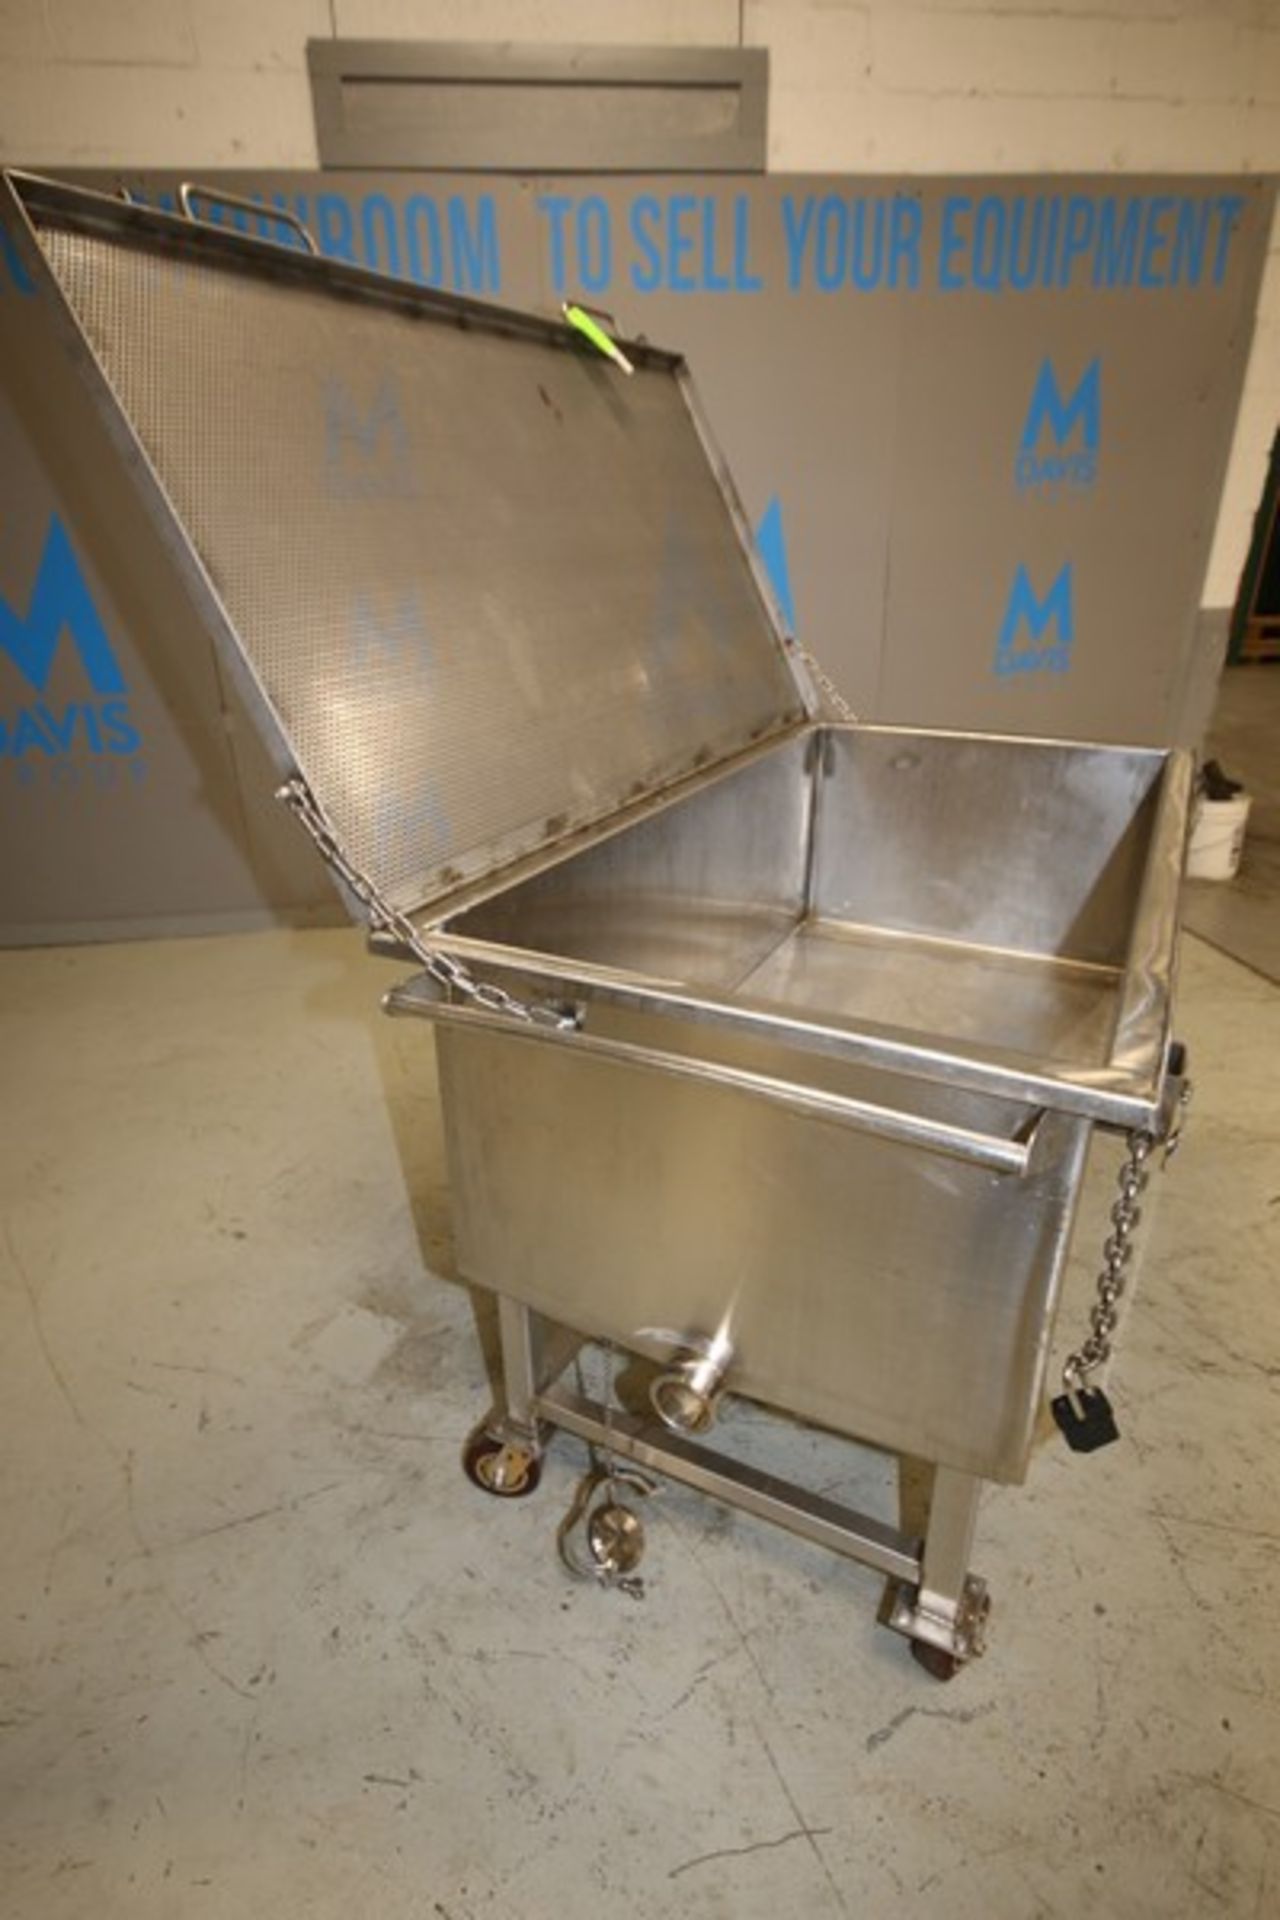 5' L x 30" W x 20" D S/S Portable Tank with Hinged Lid, 3" CT Drain (INV#92814) (Located @ the MDG - Image 3 of 5